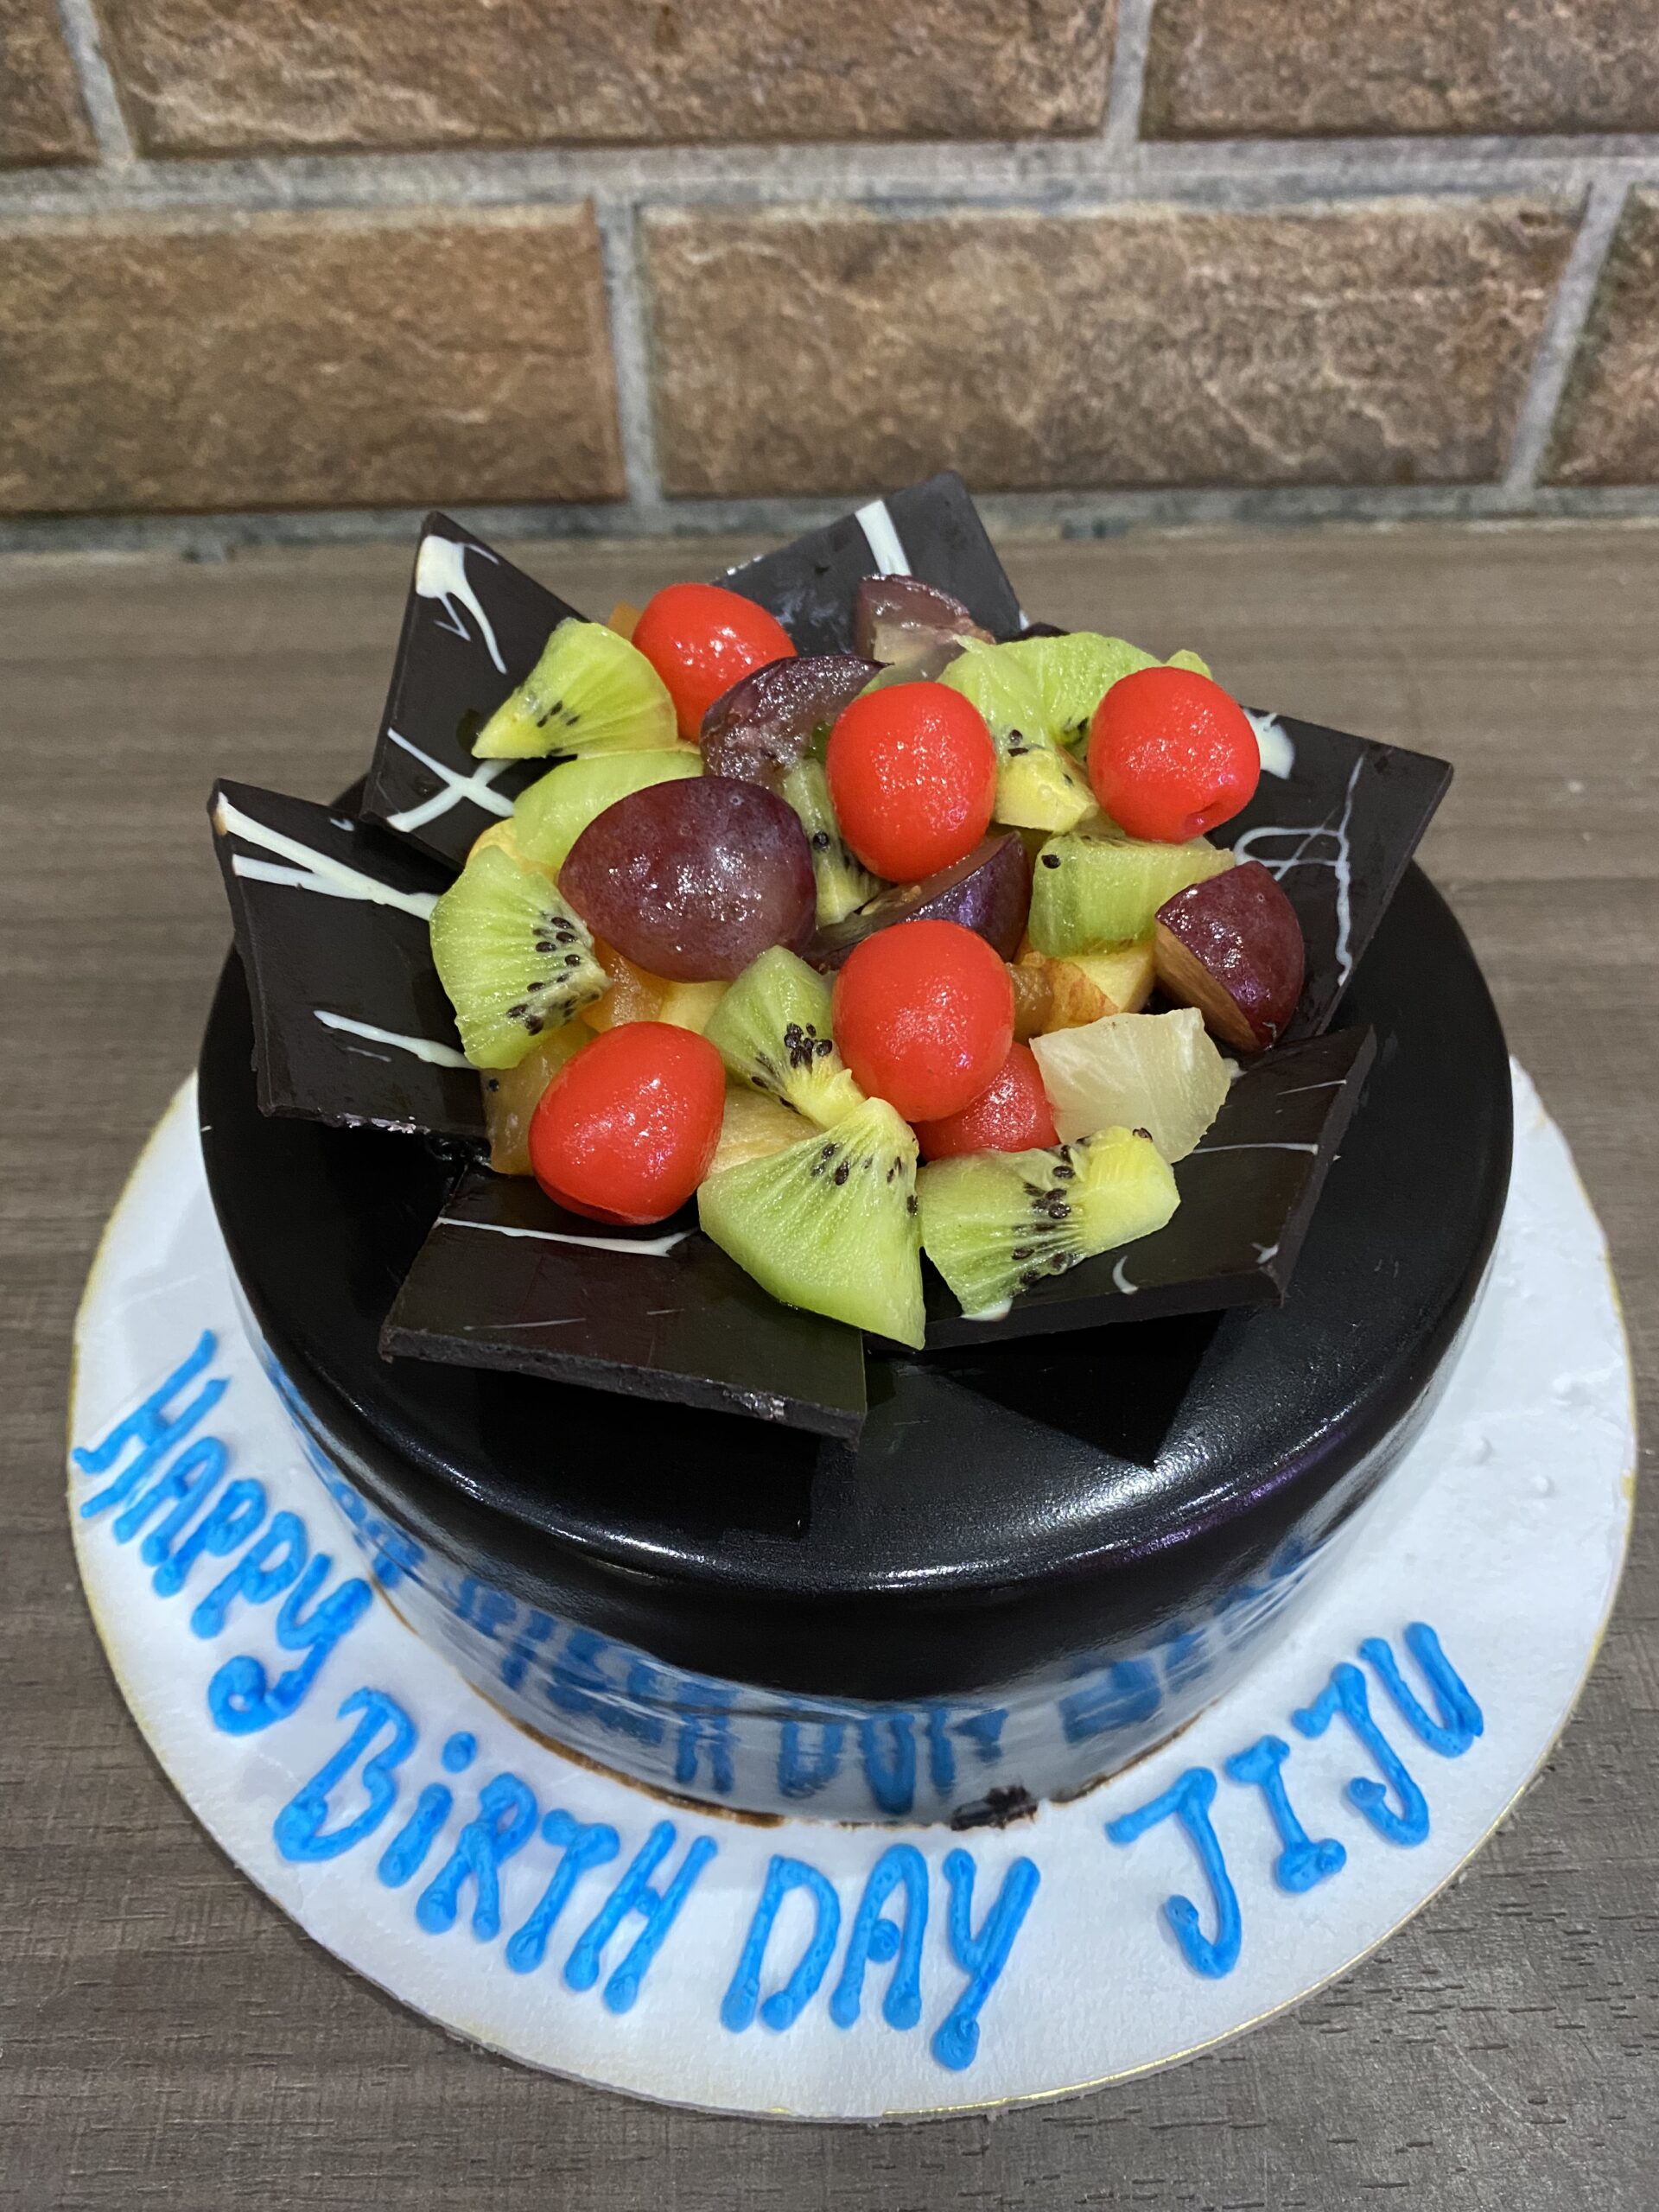 Another of shweta's creations. Happy birthday Jiju. Cake l… | Flickr